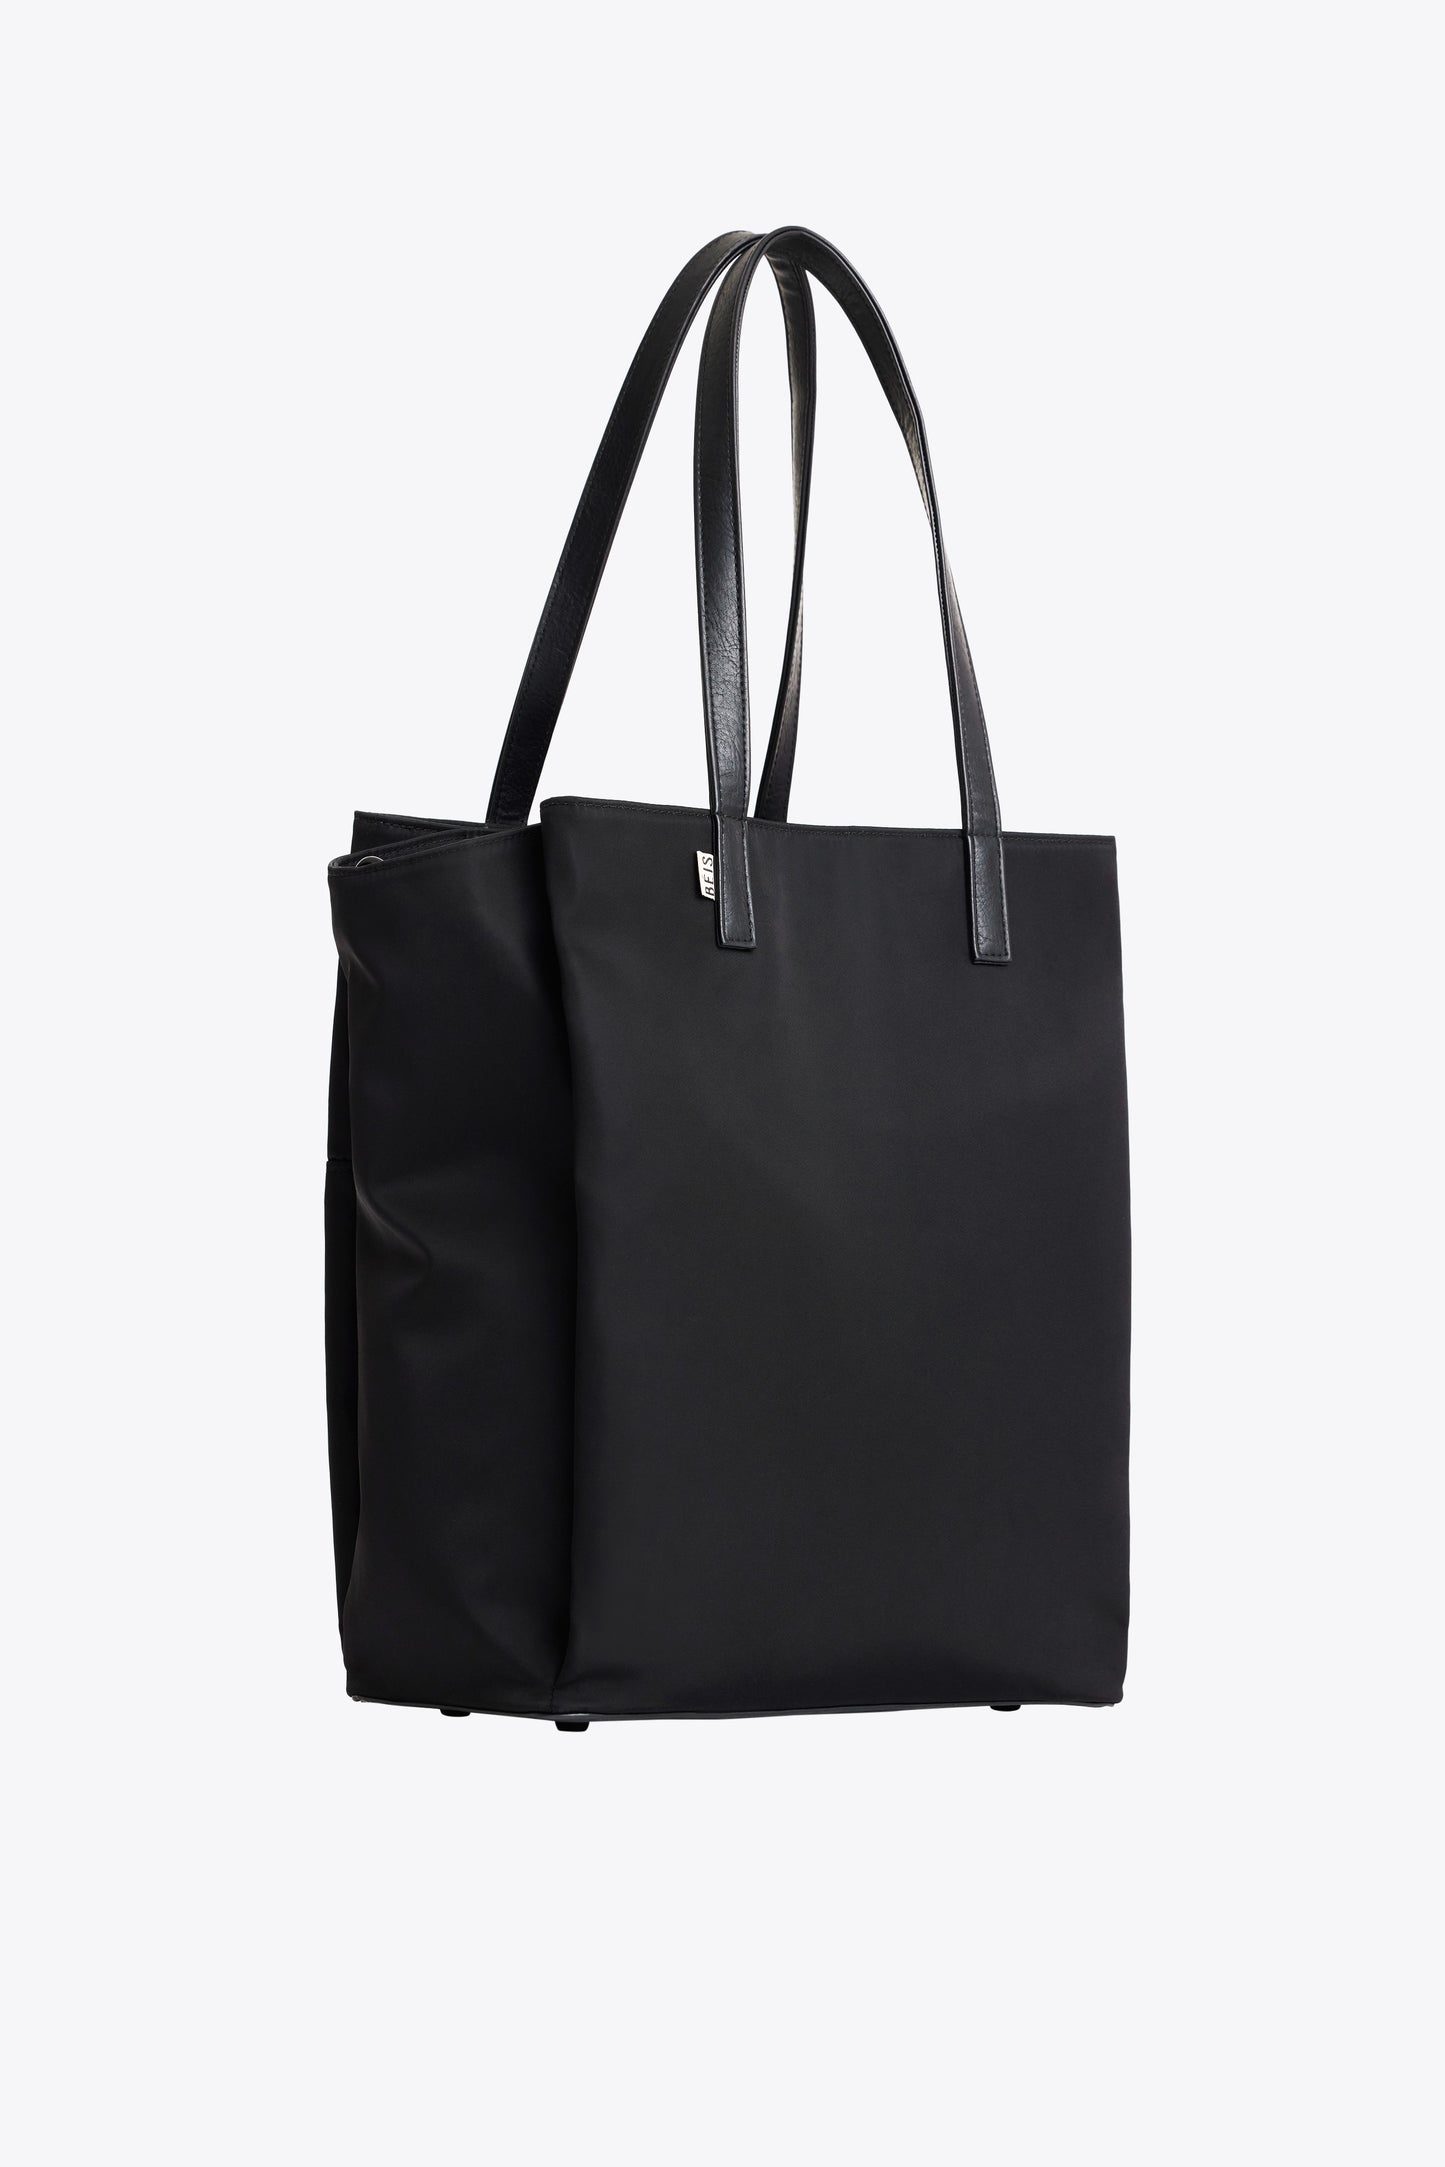 The Commuter Tote in Black